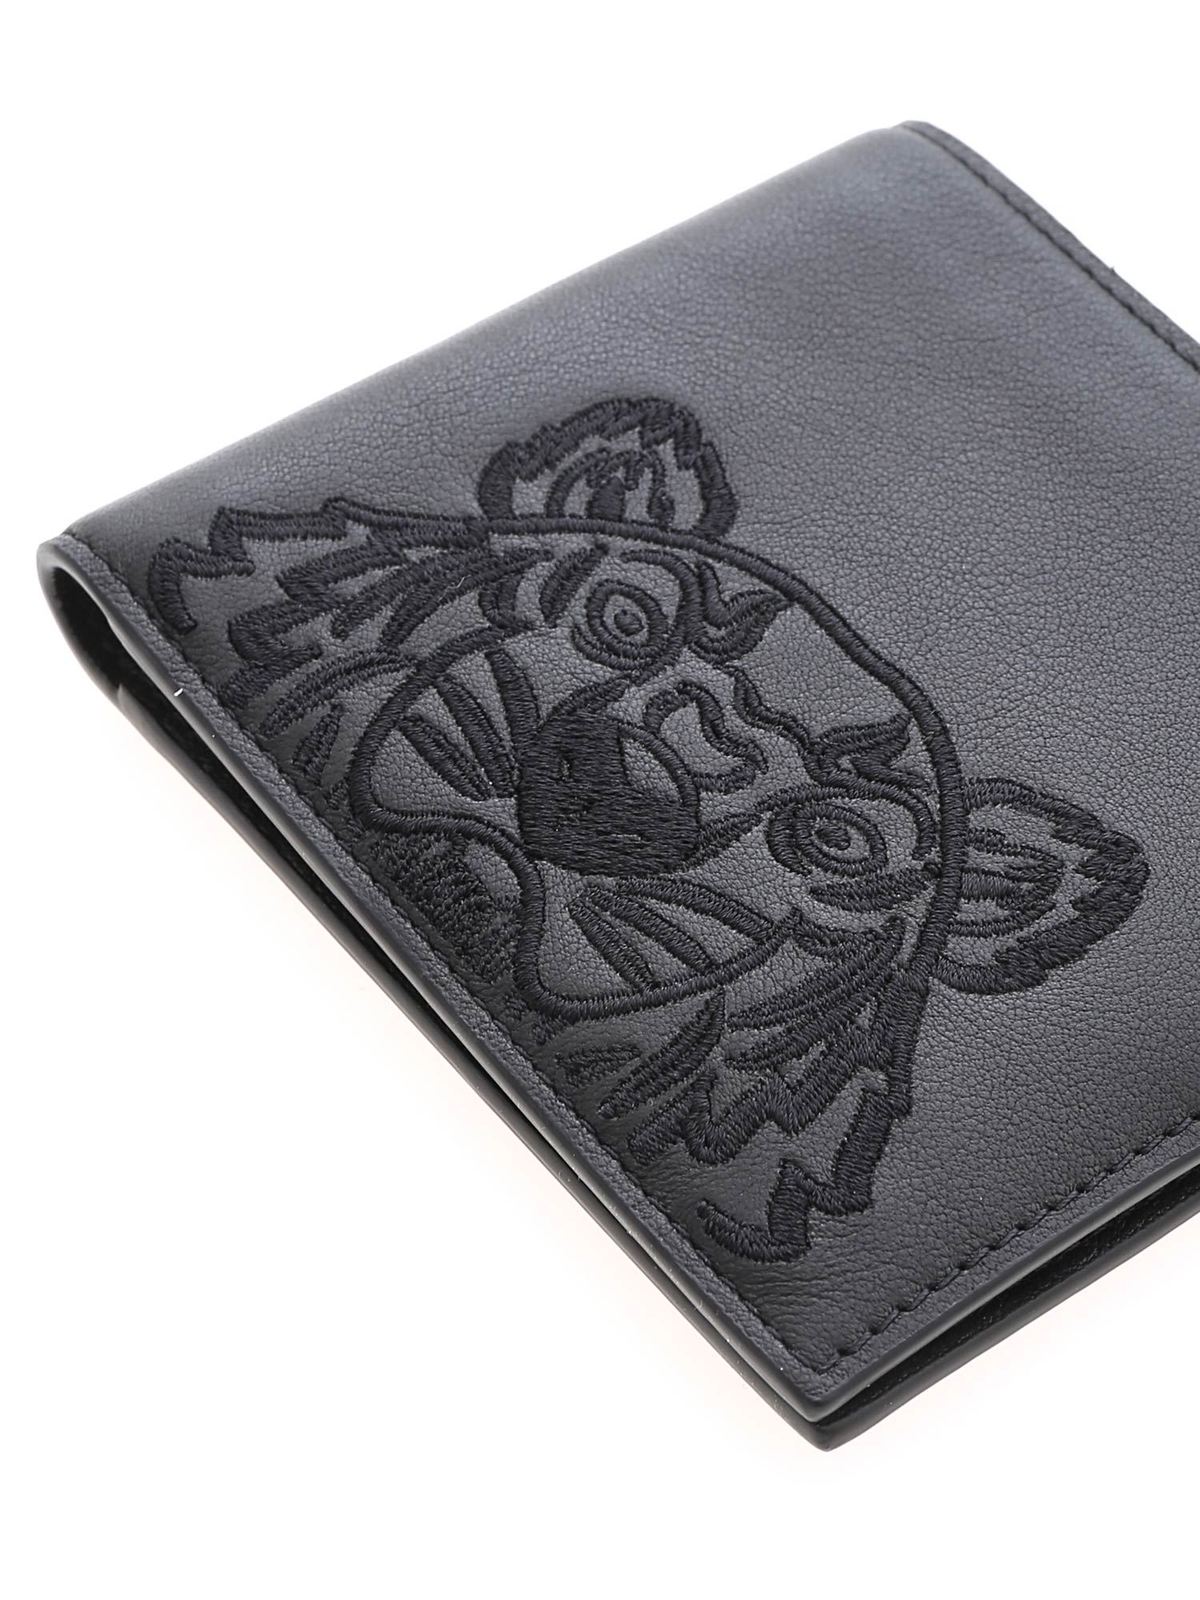 Wallets & purses Kenzo - Tiger black wallet featuring embroidery 